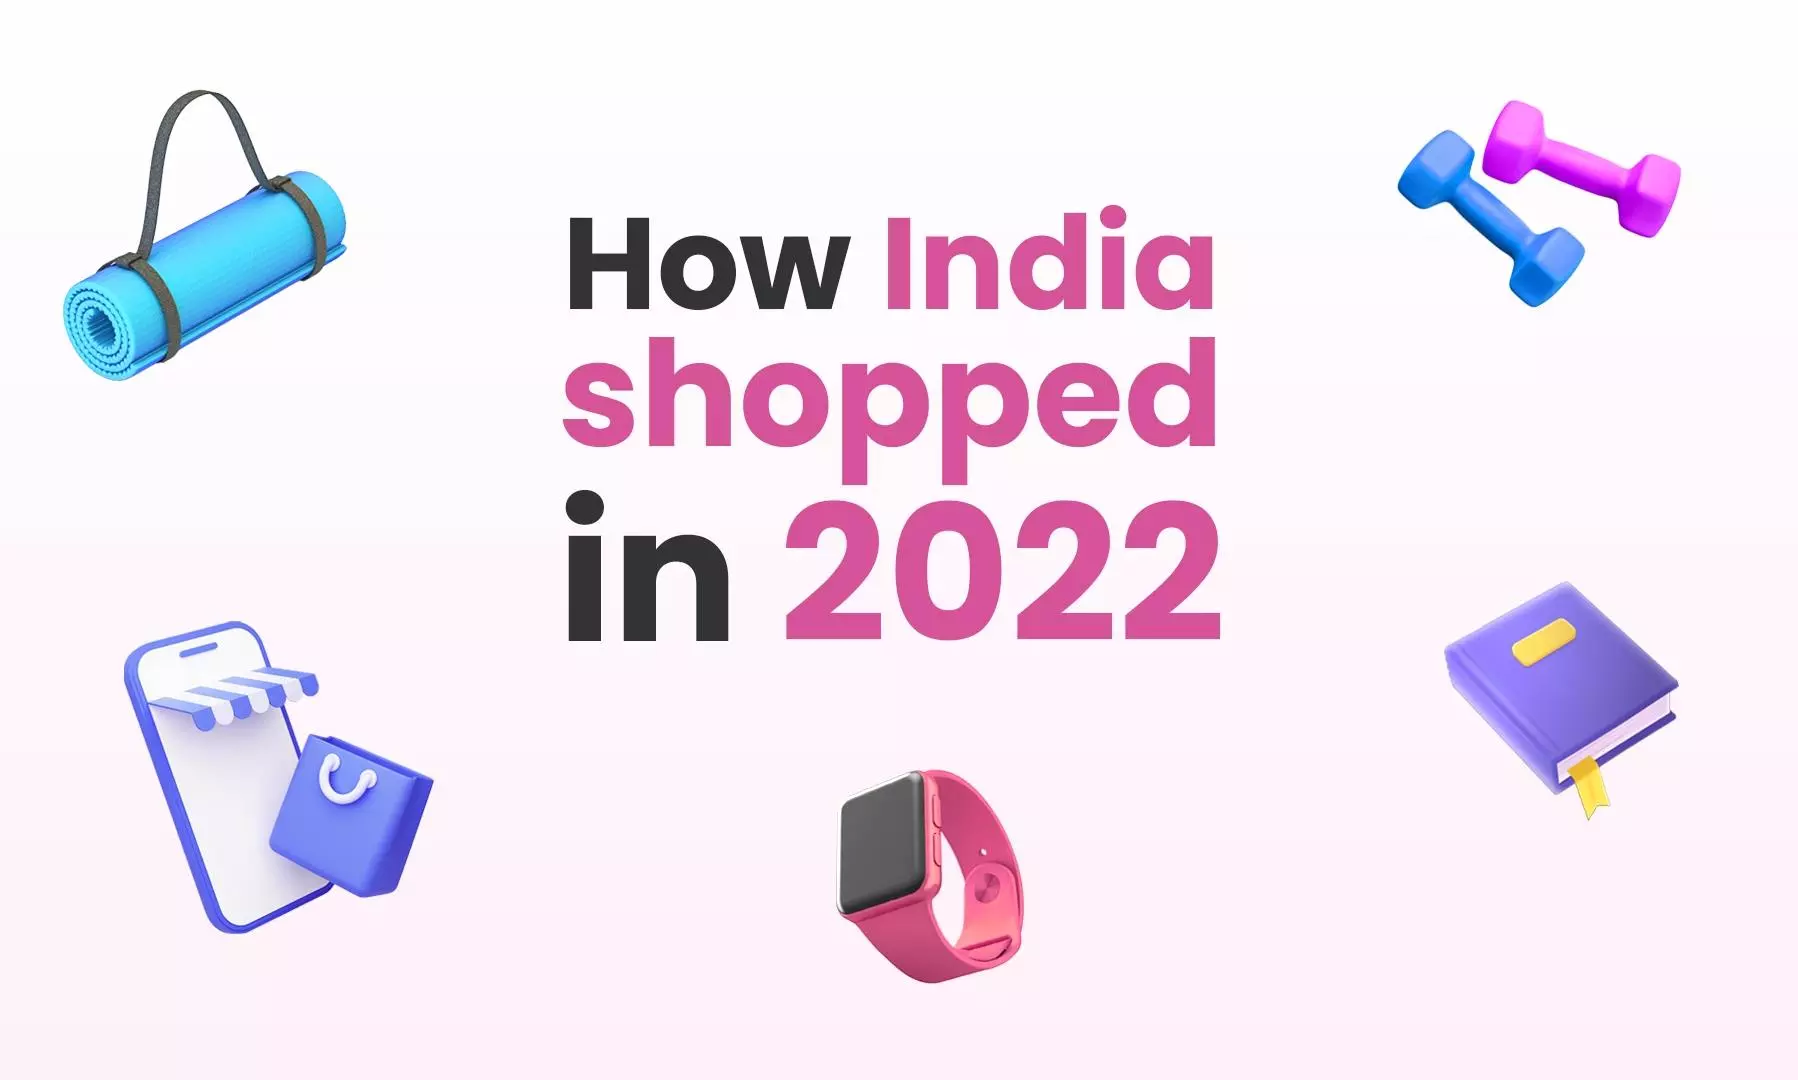 How India shopped through e-commerce in 2022, according to Meesho